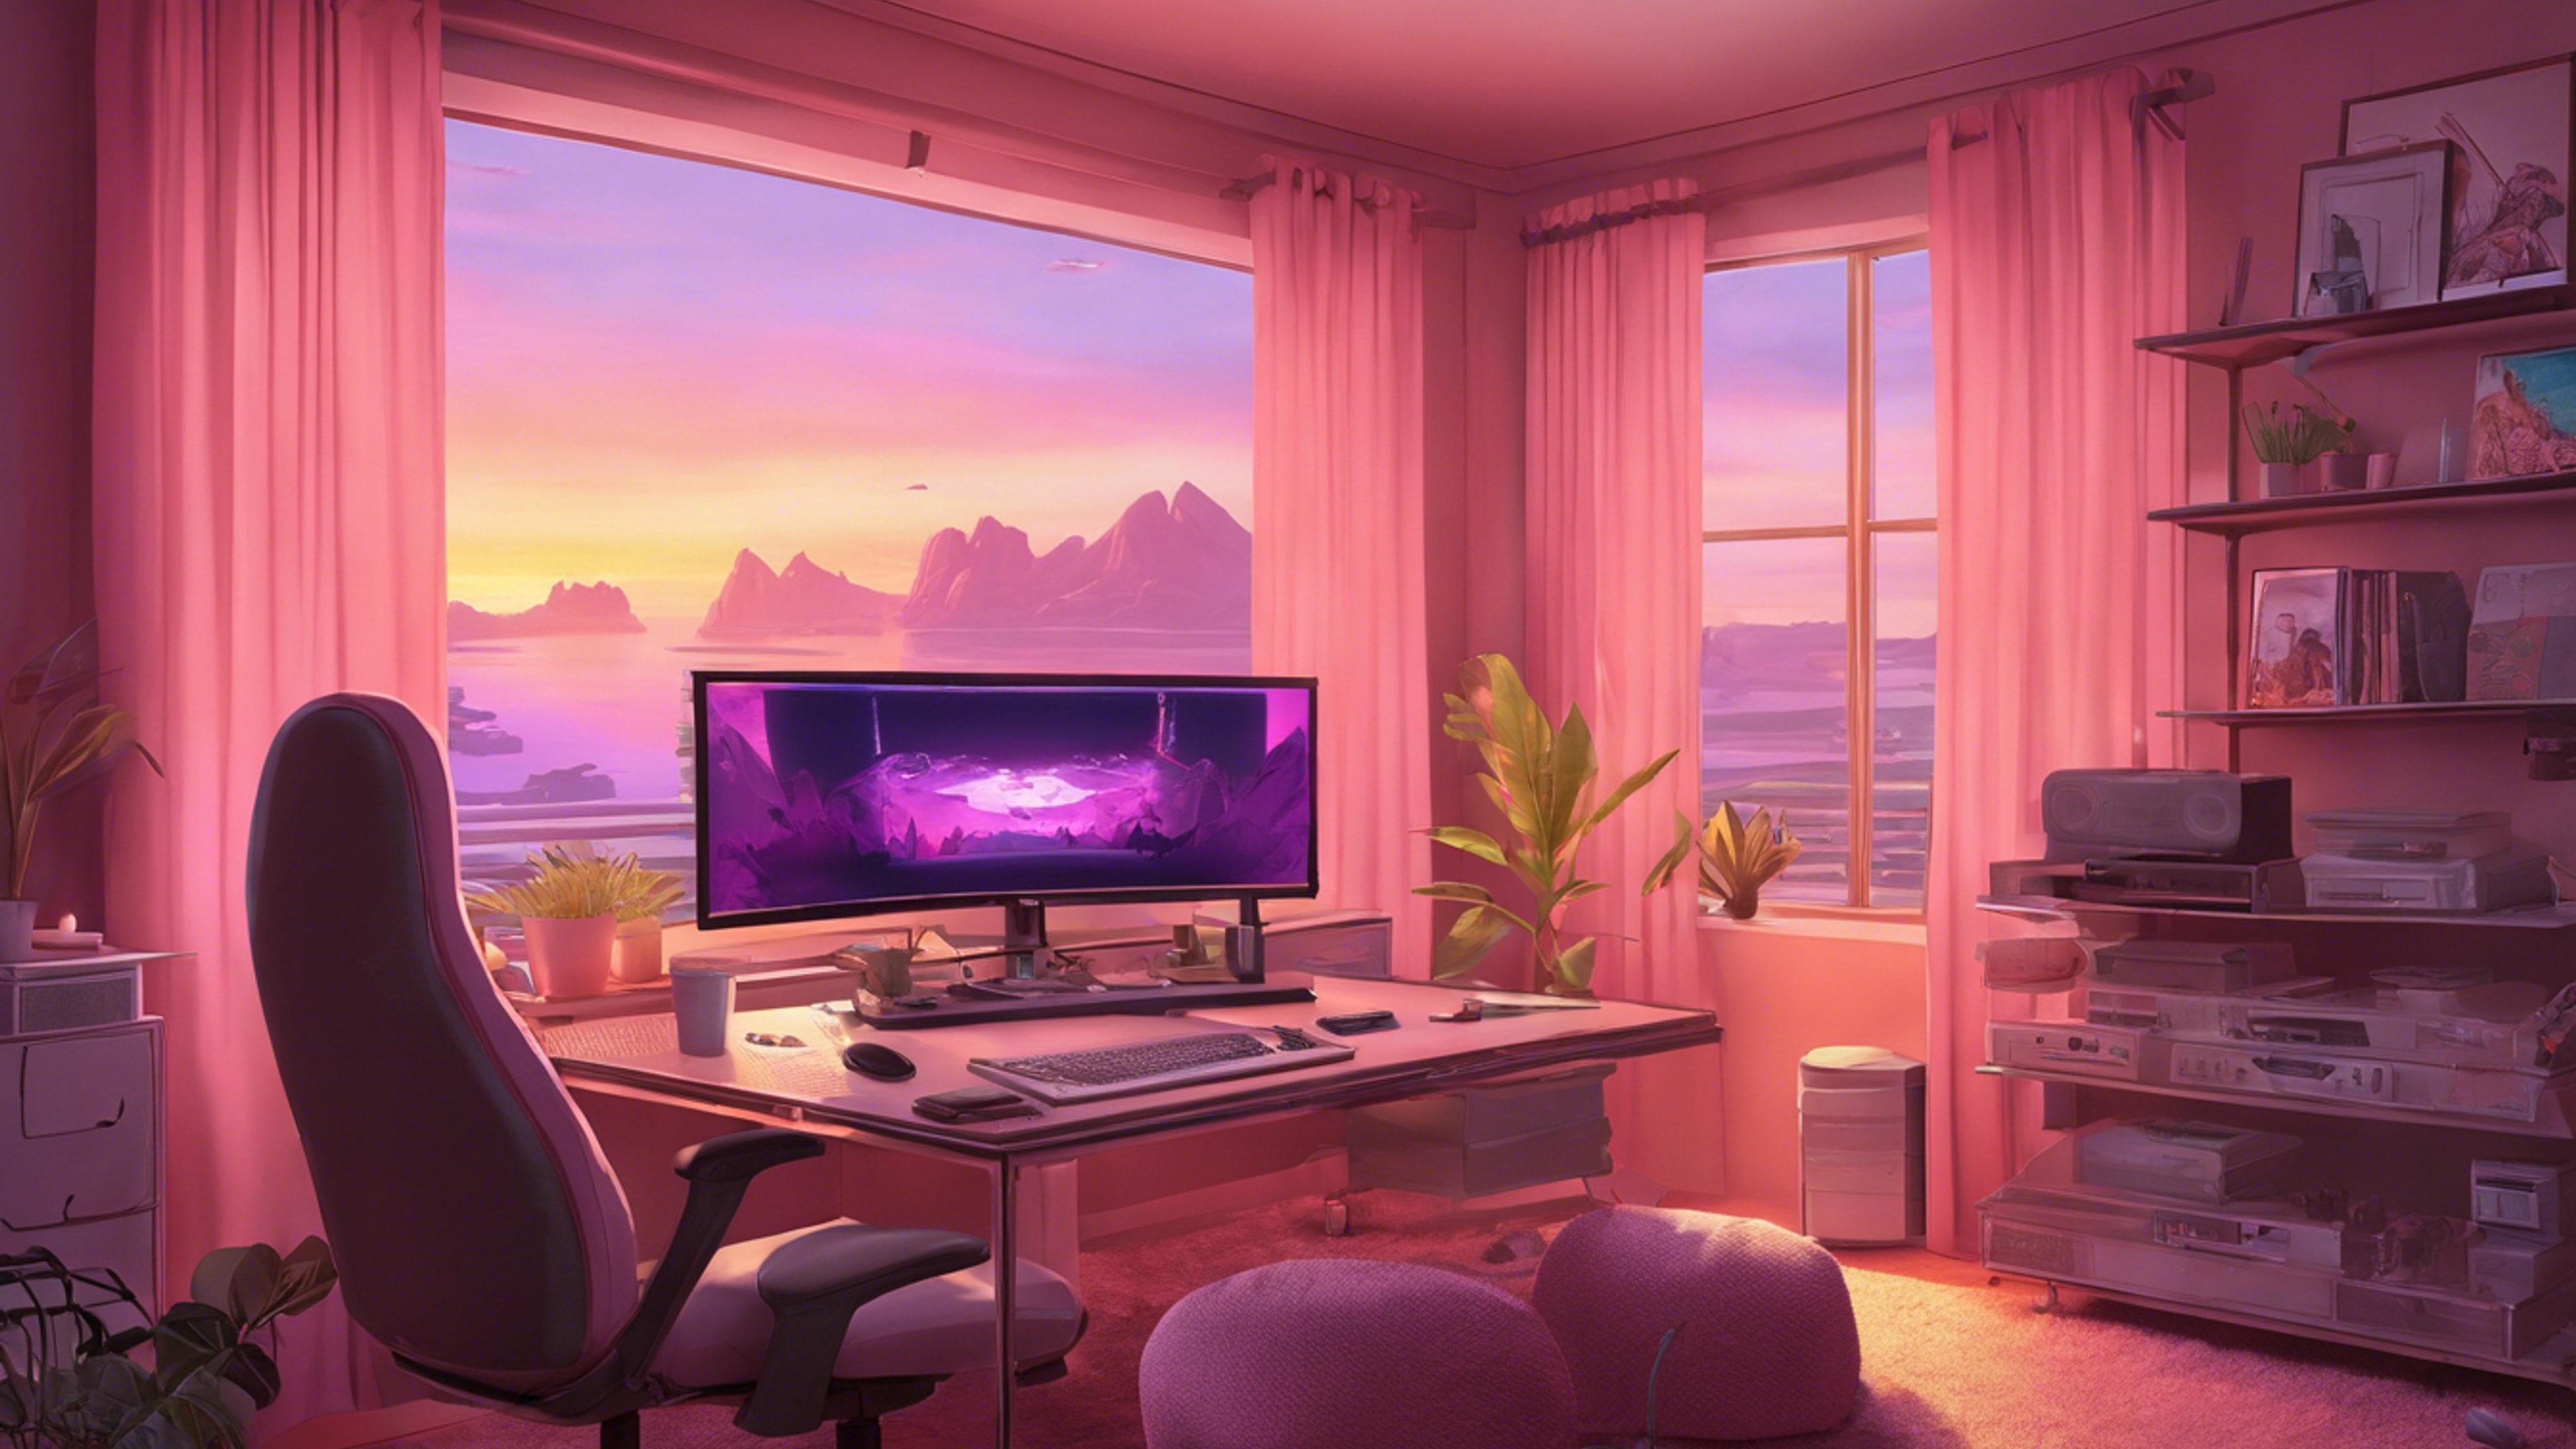 A beautiful shot of a gaming room at dusk with pastel pink curtains slightly drawn, allowing soft sunset hues to blend with the gaming setup's ambient light. Tapeet[98f2c4ff56214265aa5c]